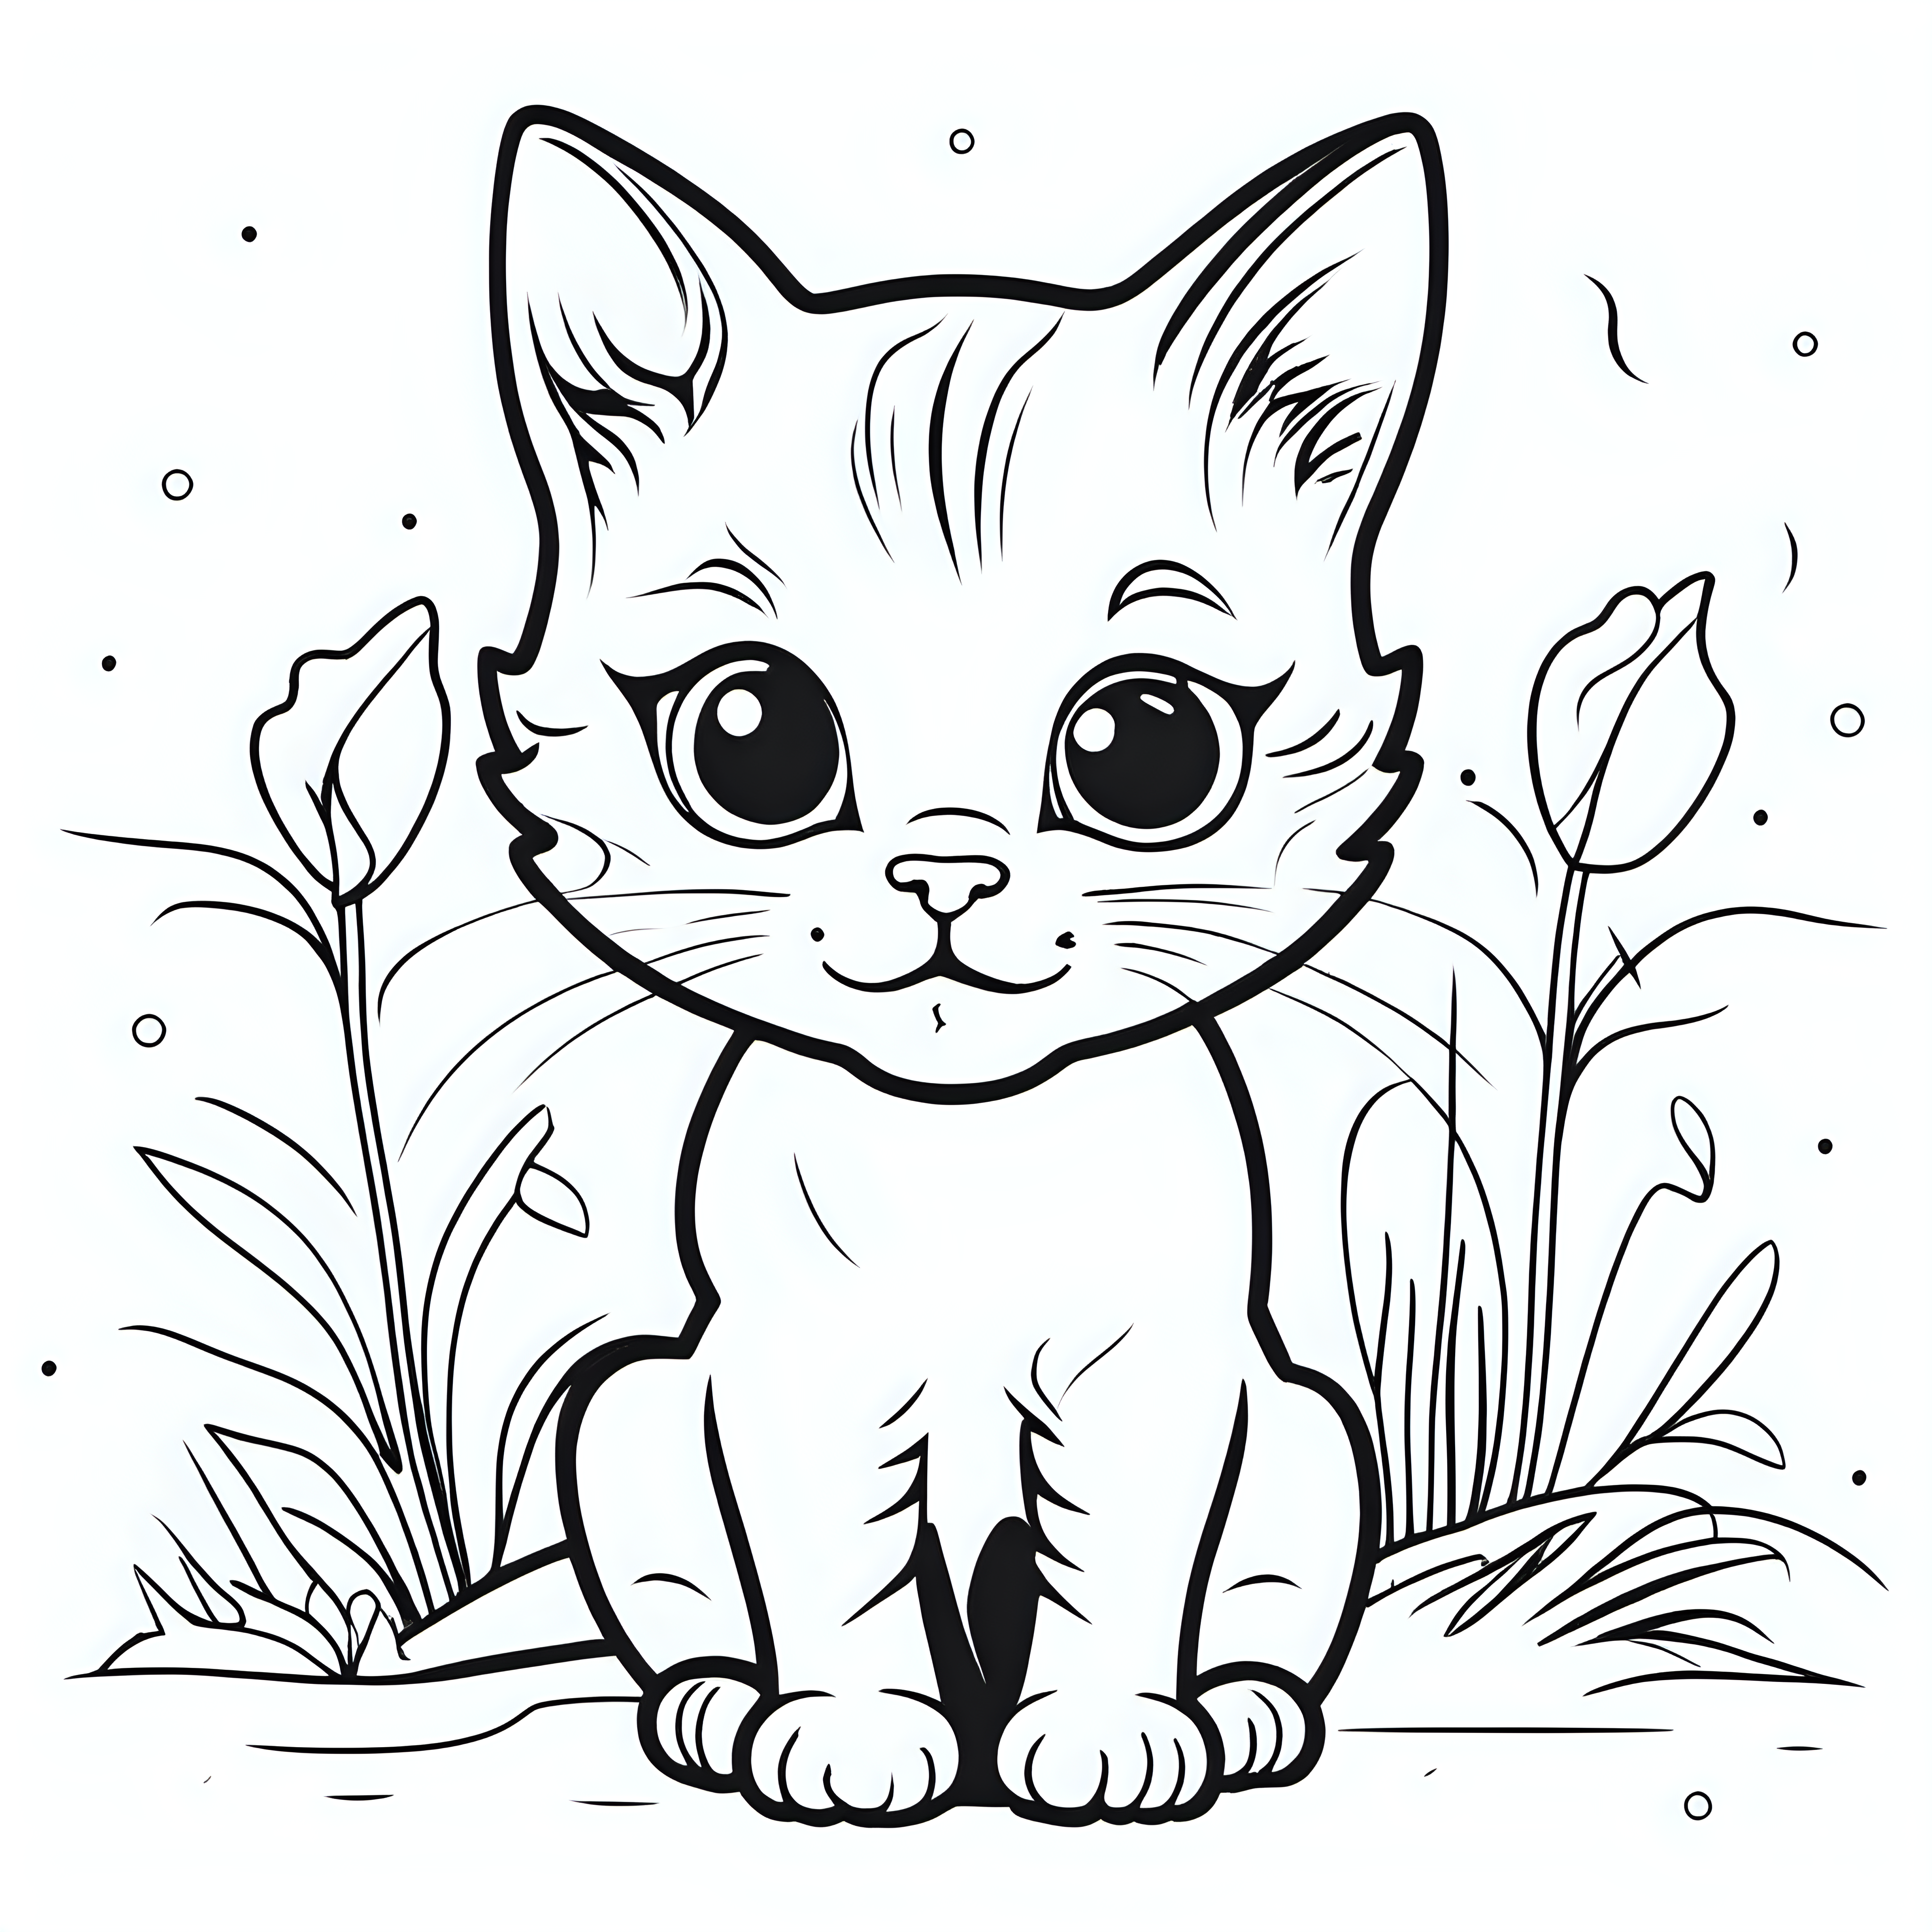 Create a cute baby cat, outline in black, coloring book for kids